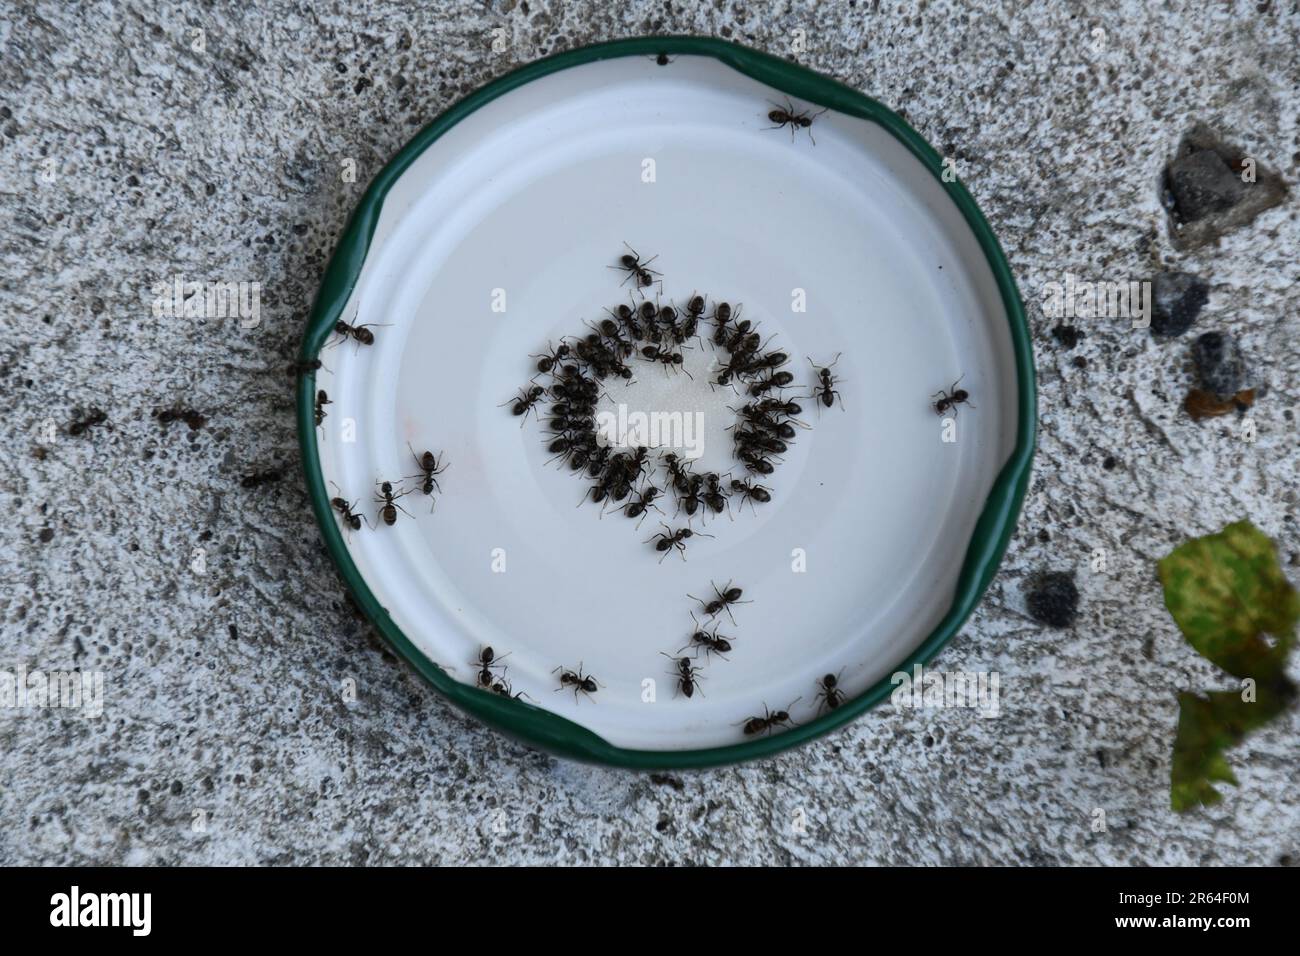 Ants eating sugar water in a jam jar lid on a hot day Stock Photo